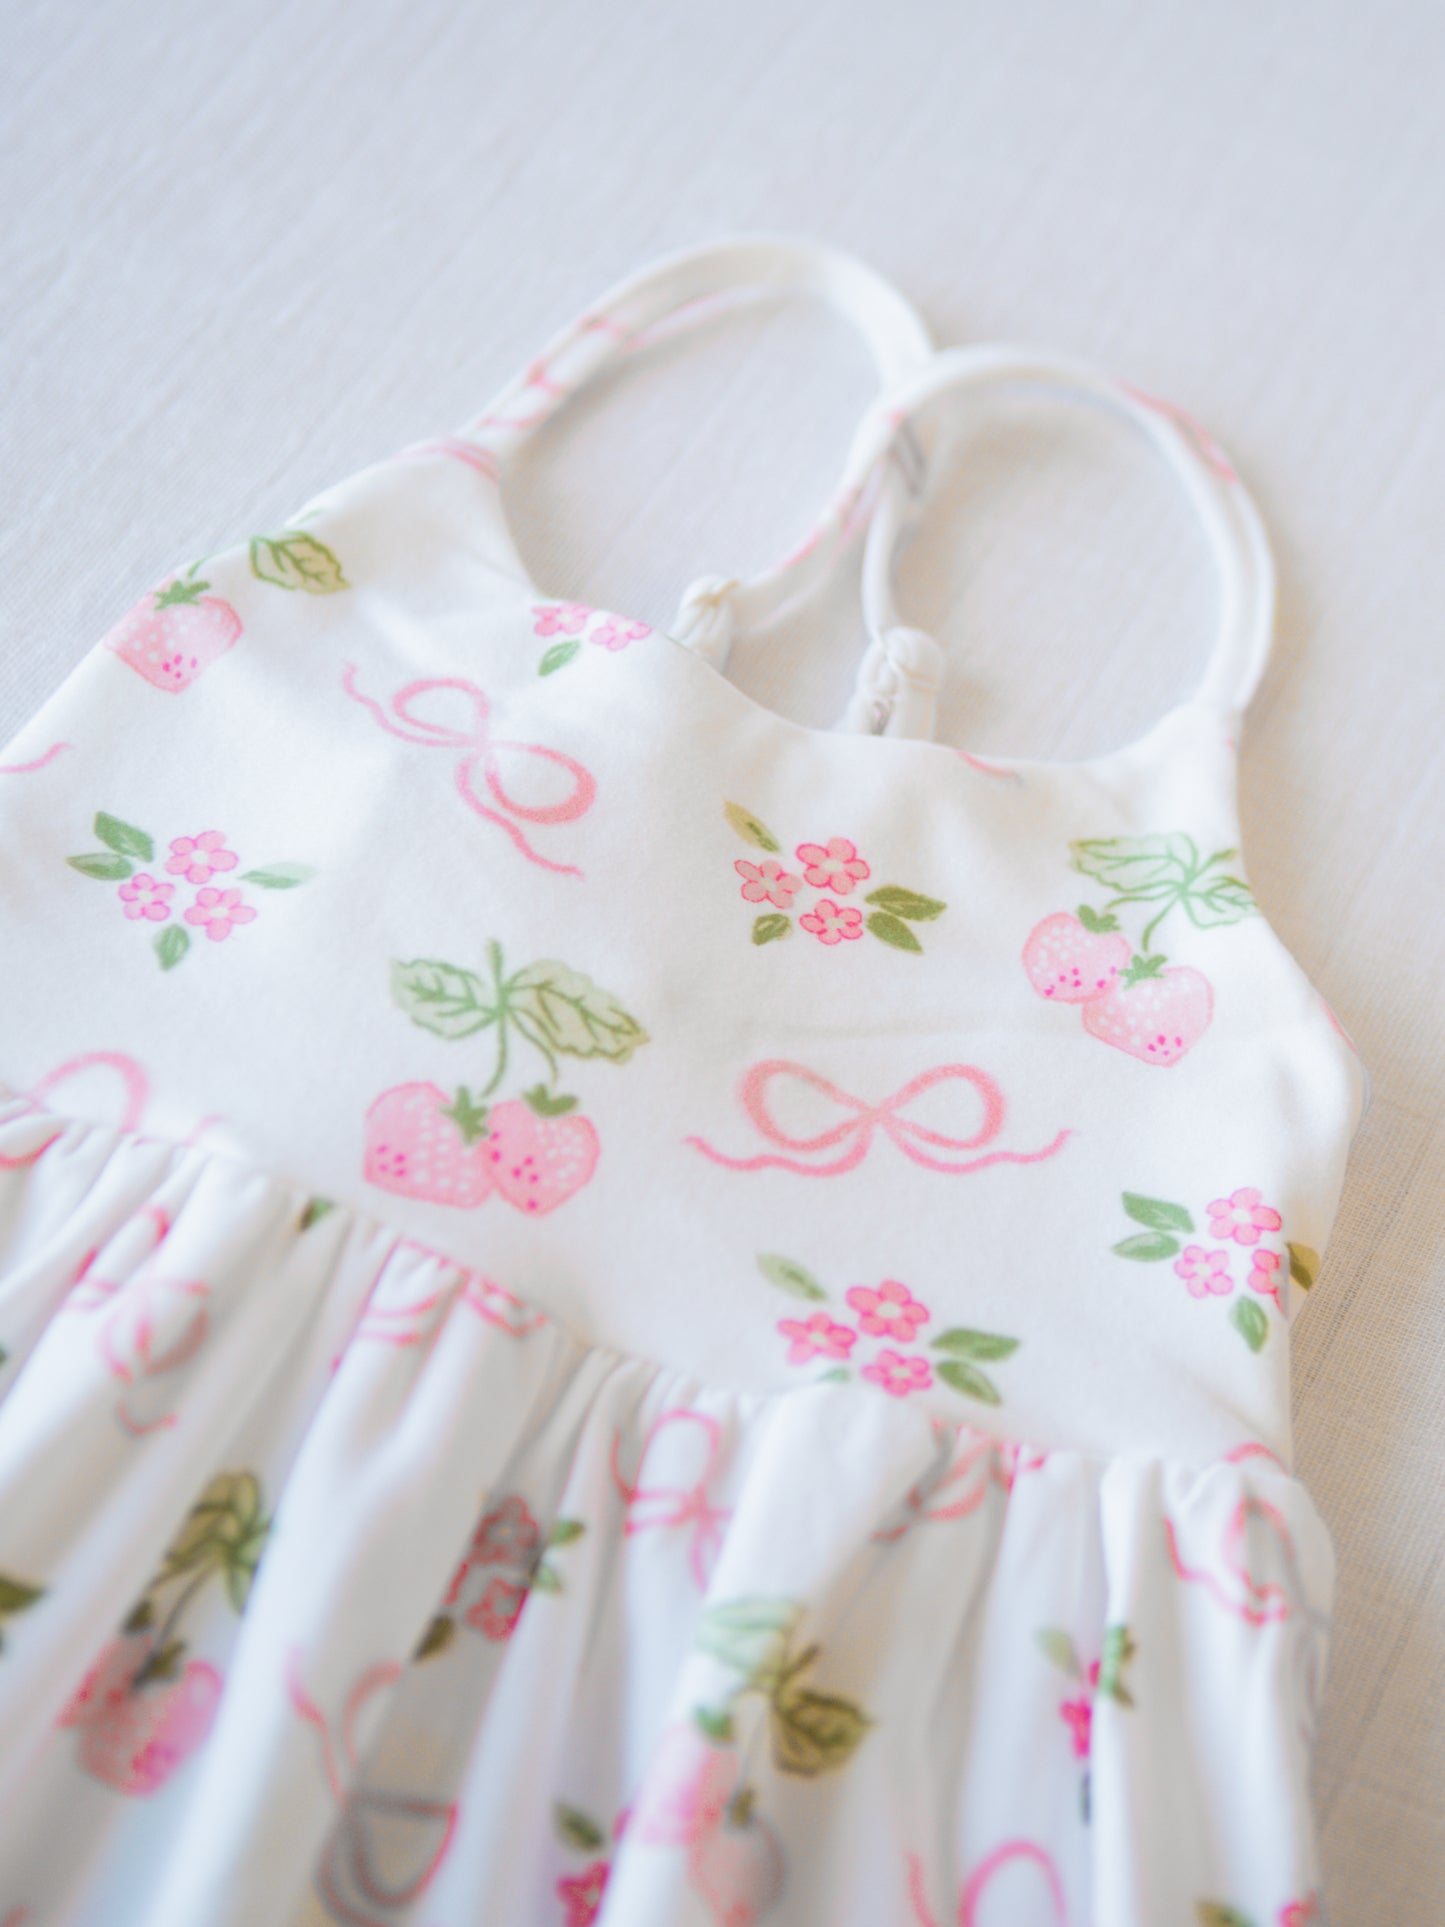 Maxi Play Dress - Pink Berry Bows